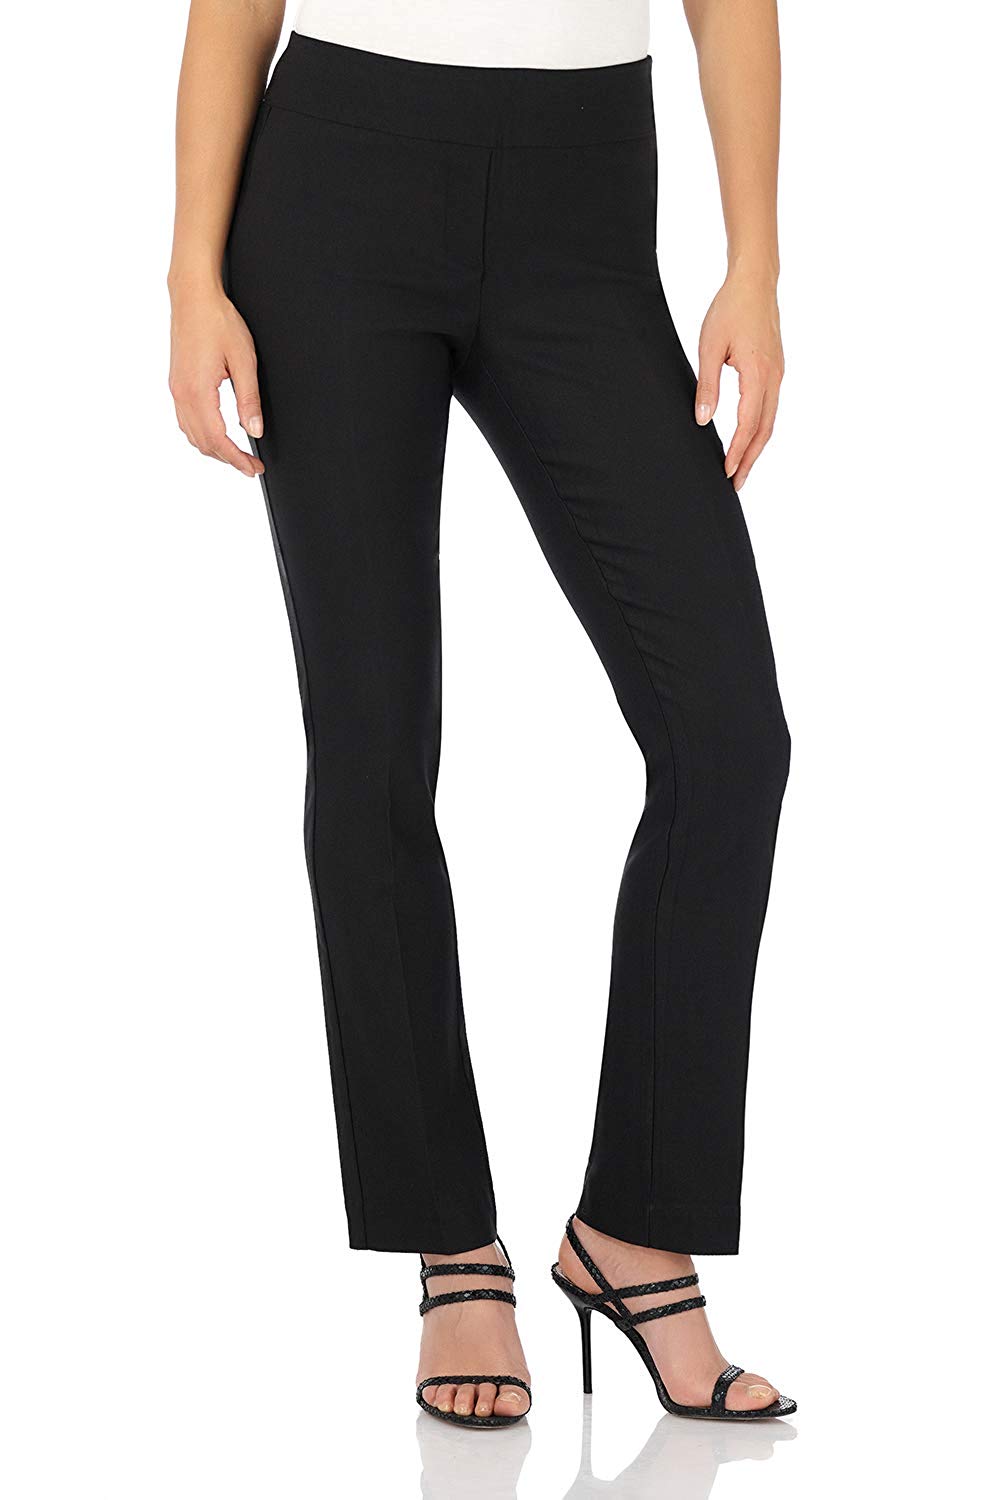 Rekucci Women's Ease in to Comfort Straight Leg Pant with, Black, Size ...